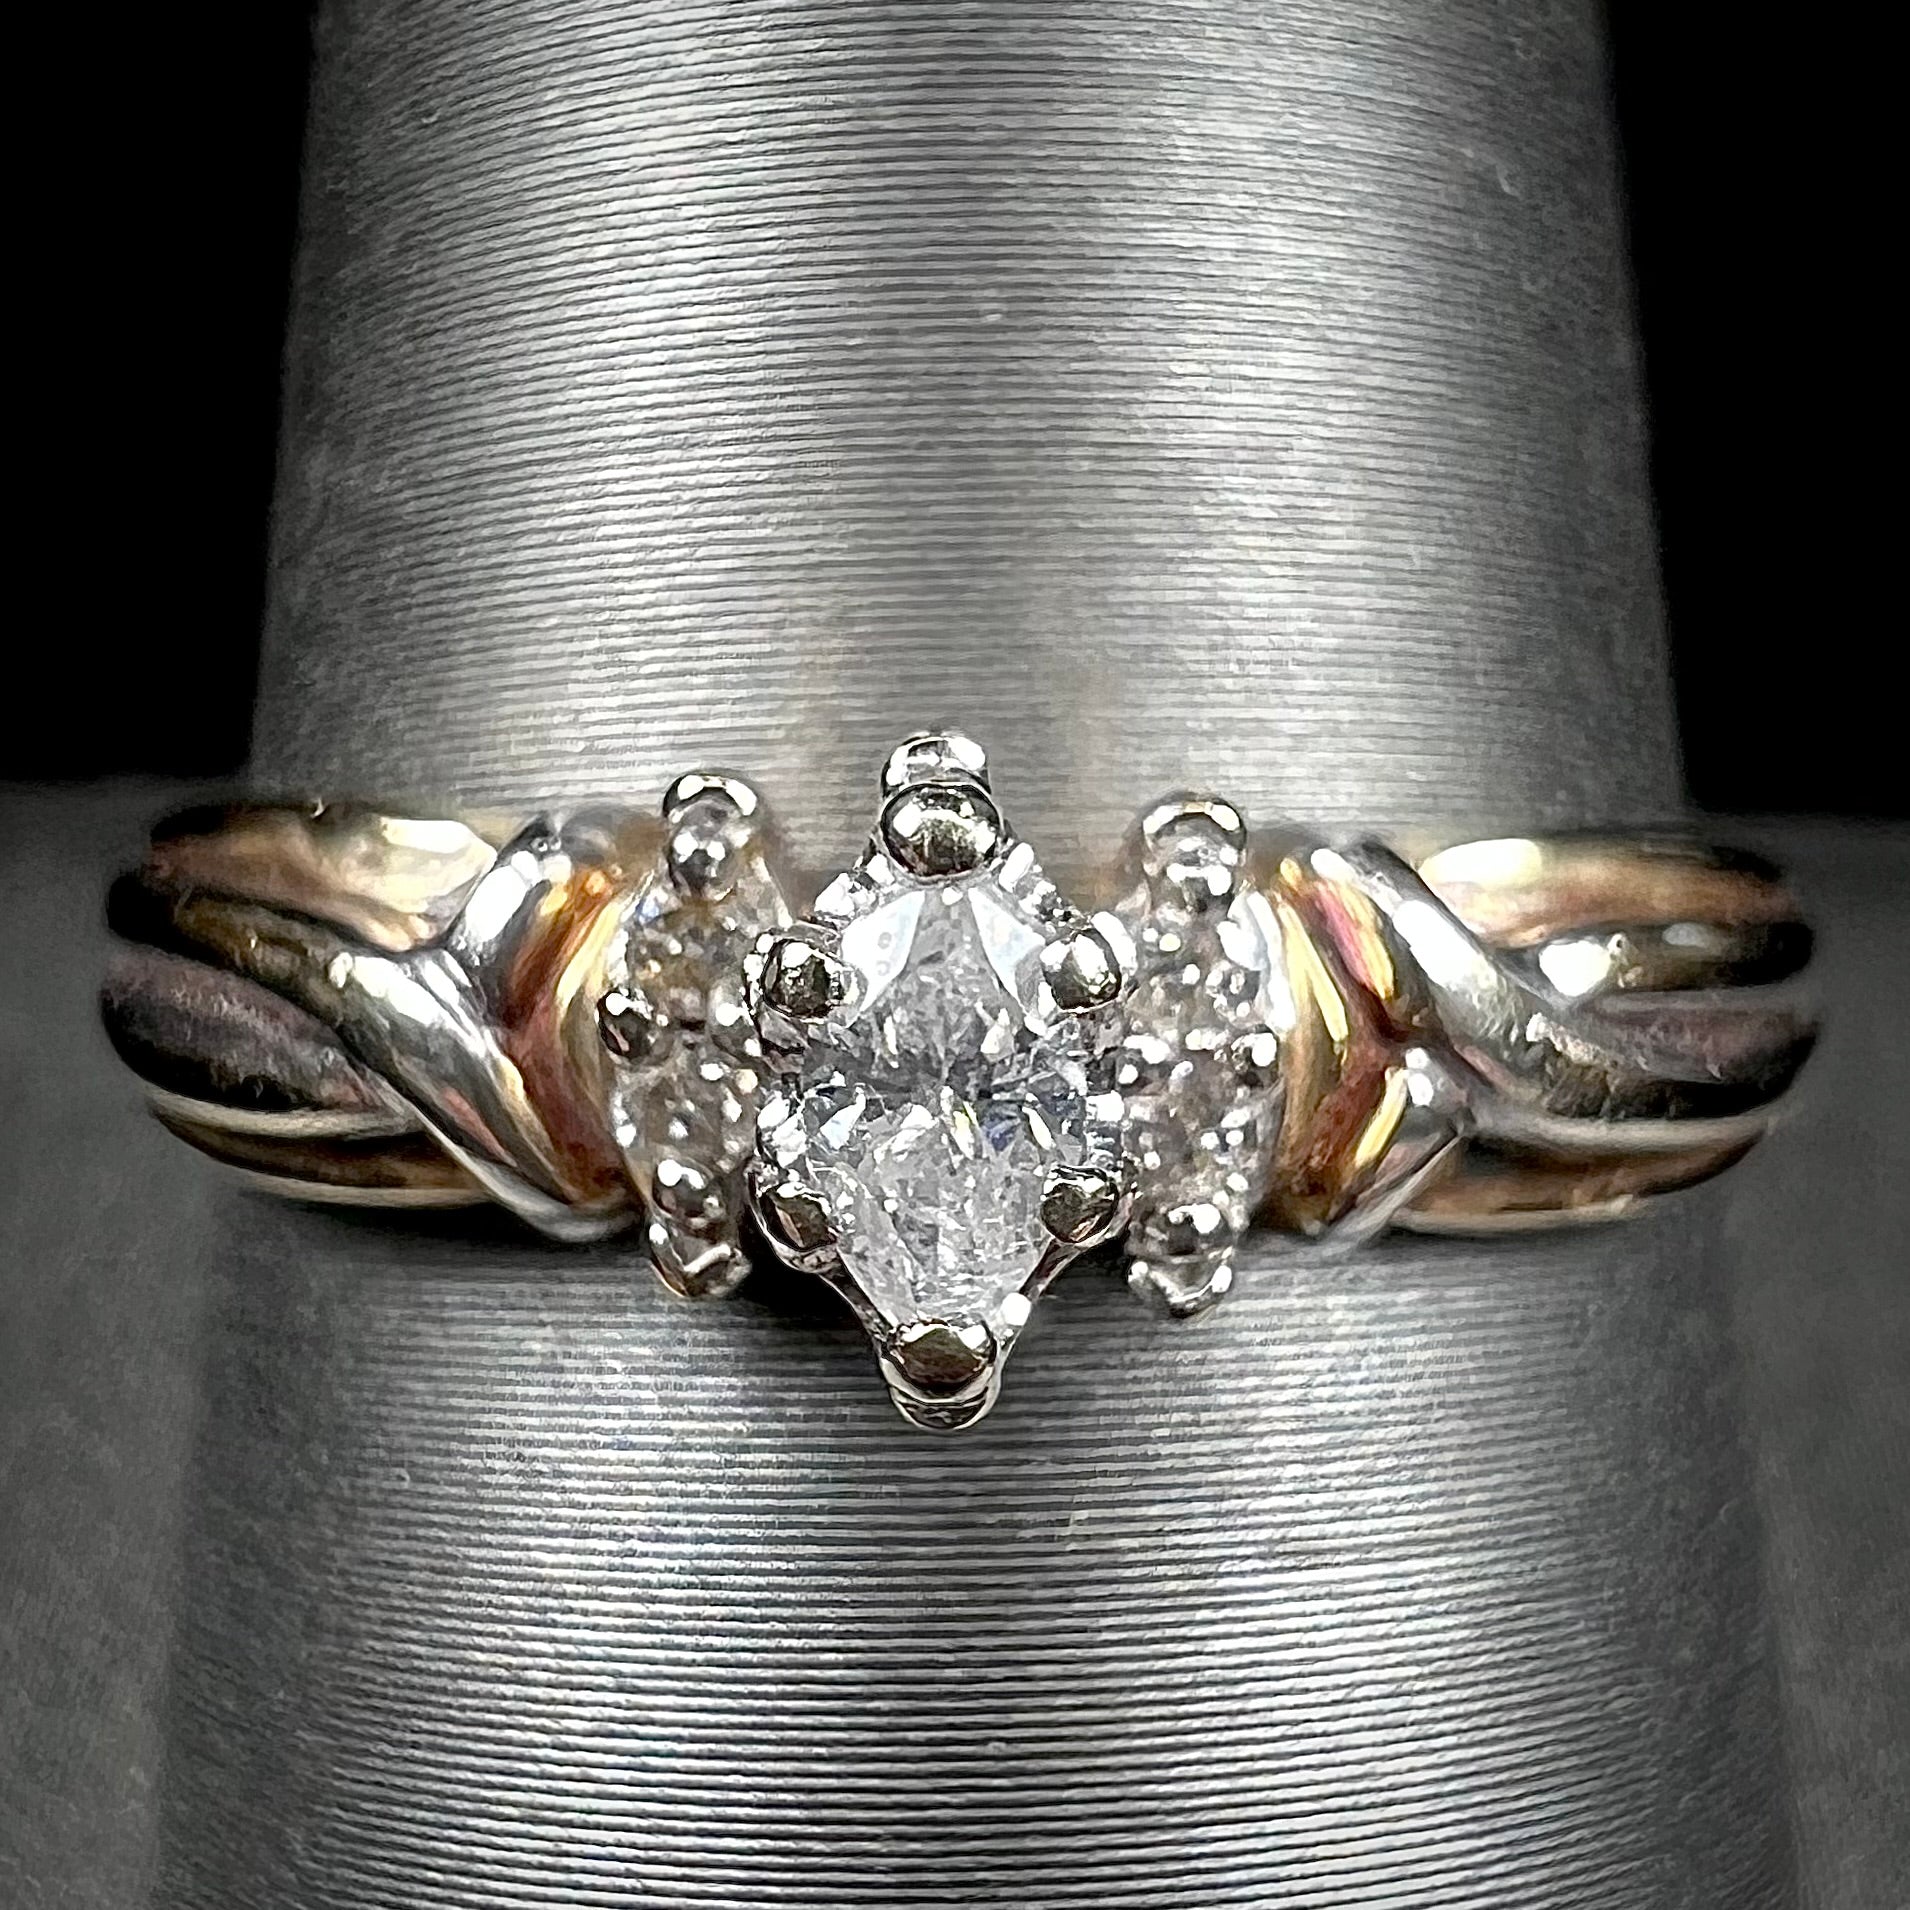 A ladies' two-tone white and yellow gold marquise cut diamond enagagement ring.  There are round diamond accents.